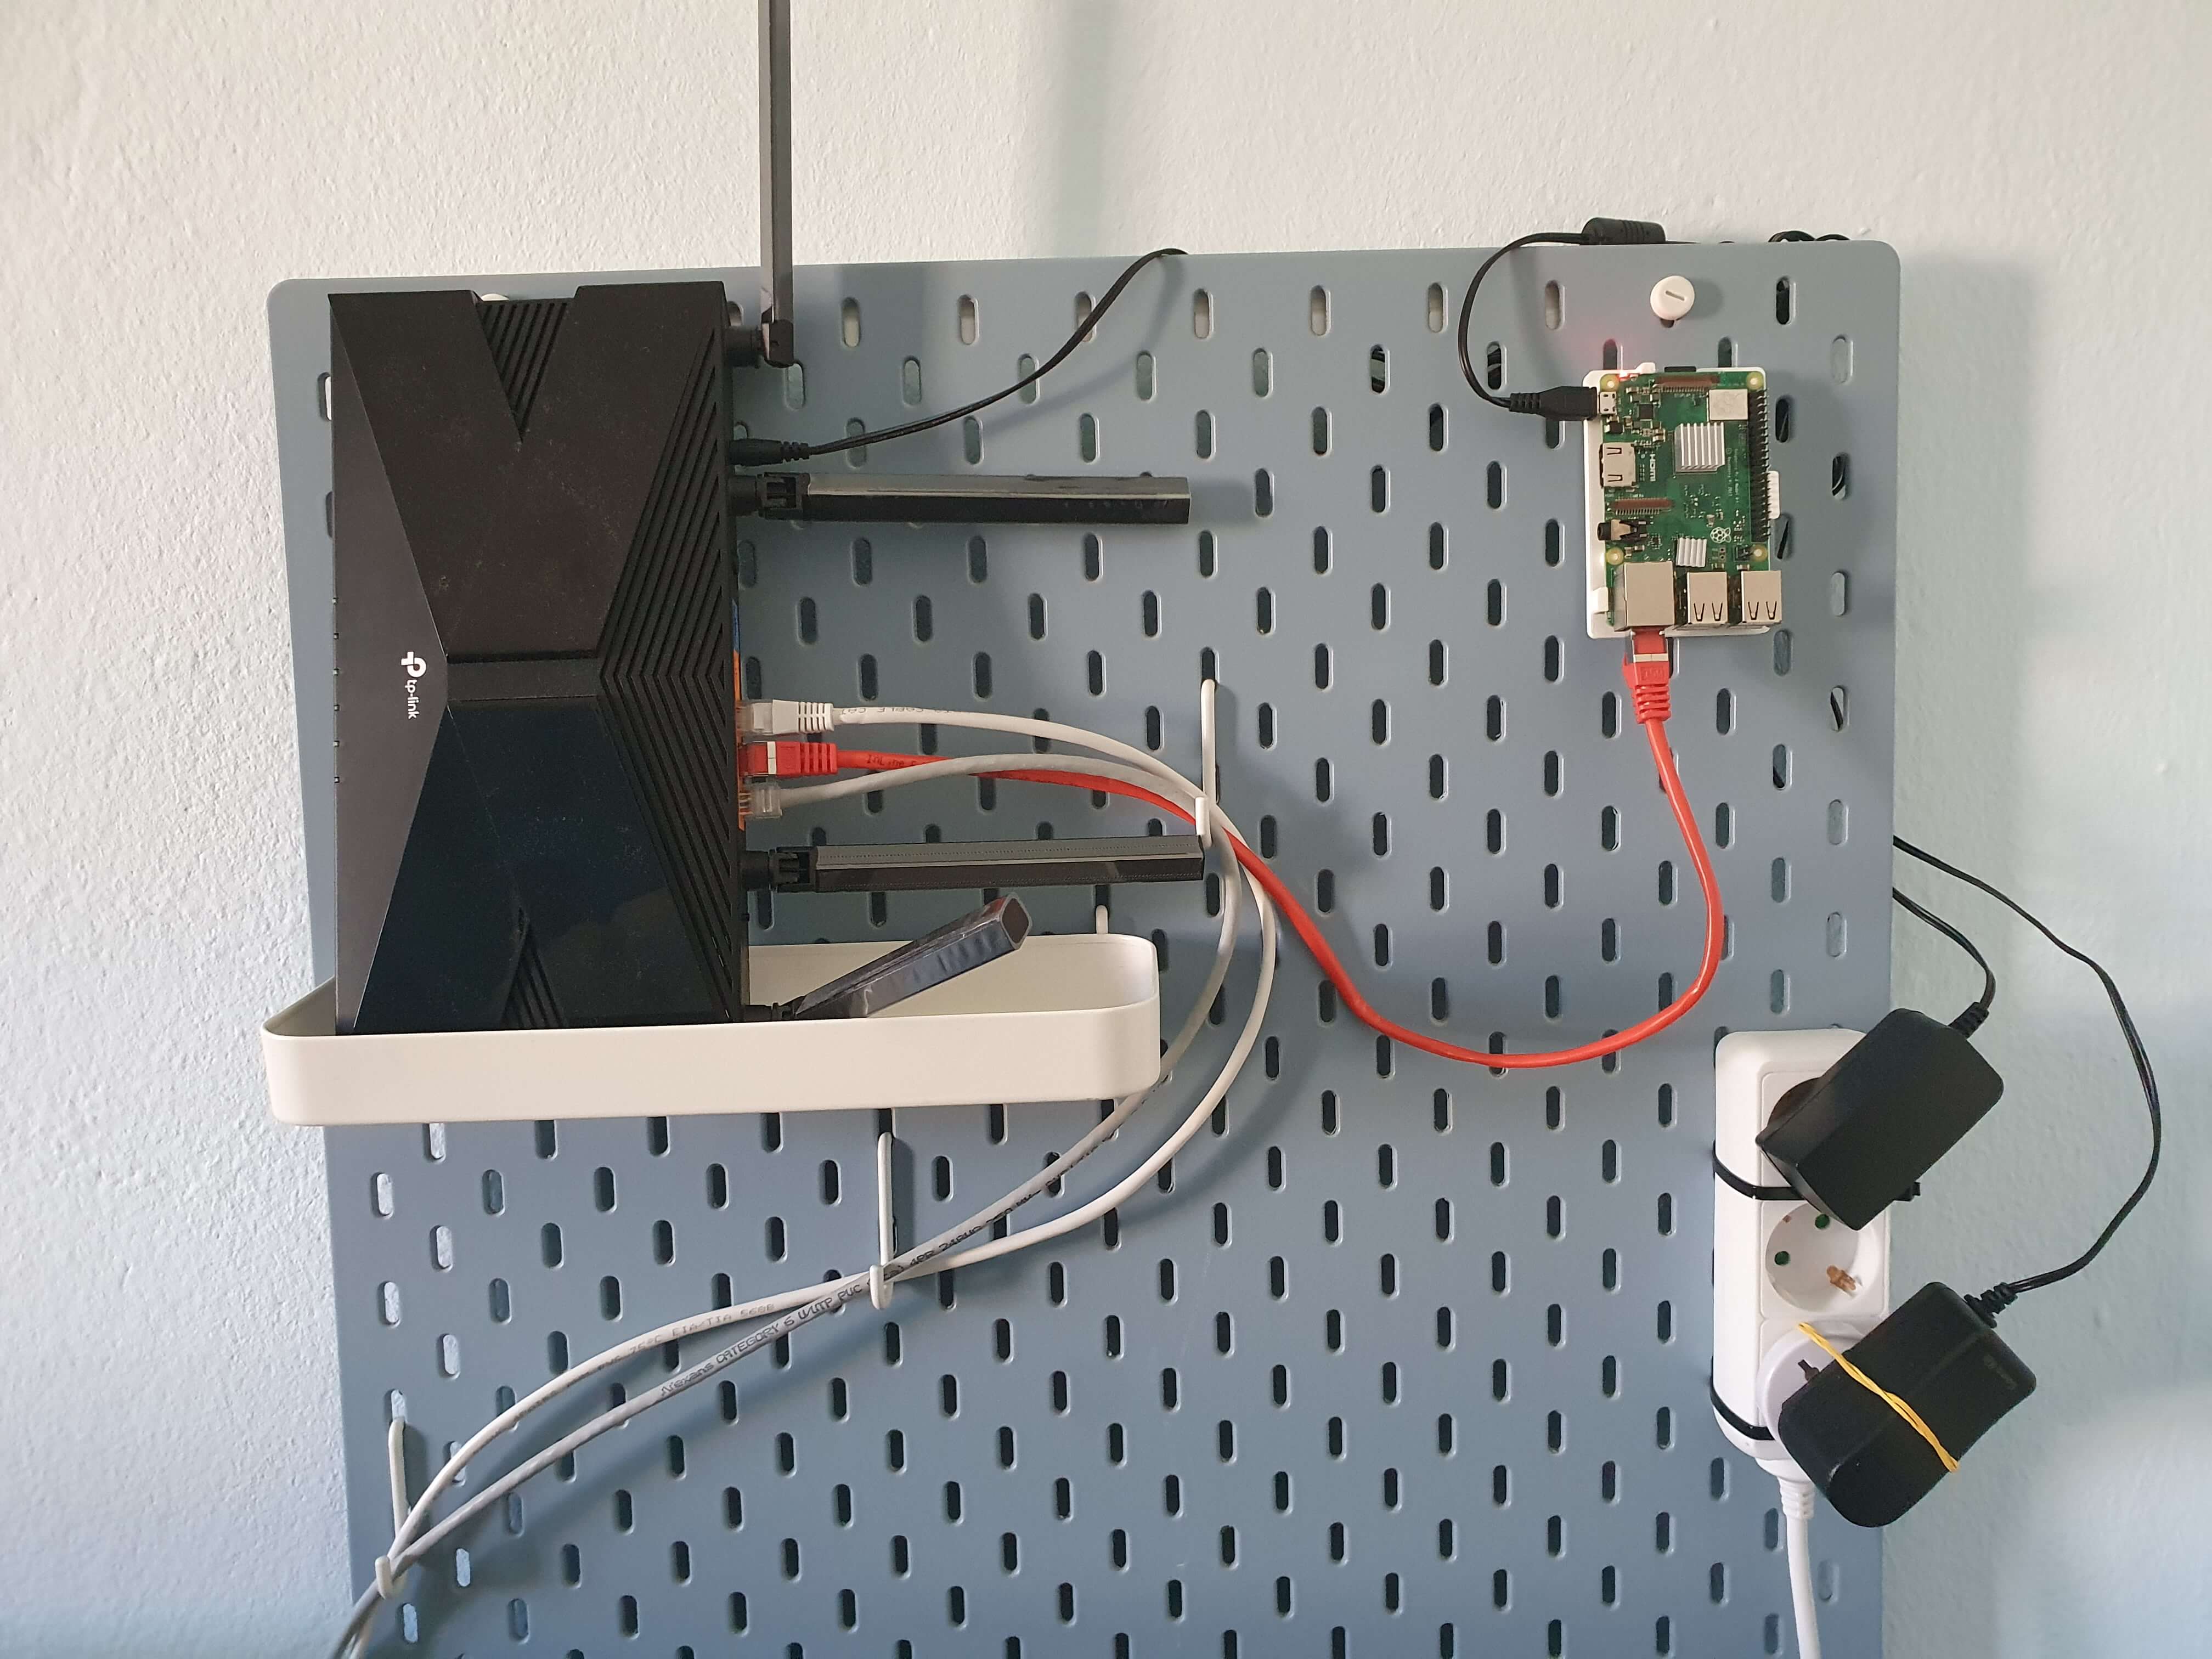 Image showing wall-mounted router and a Raspberry Pi